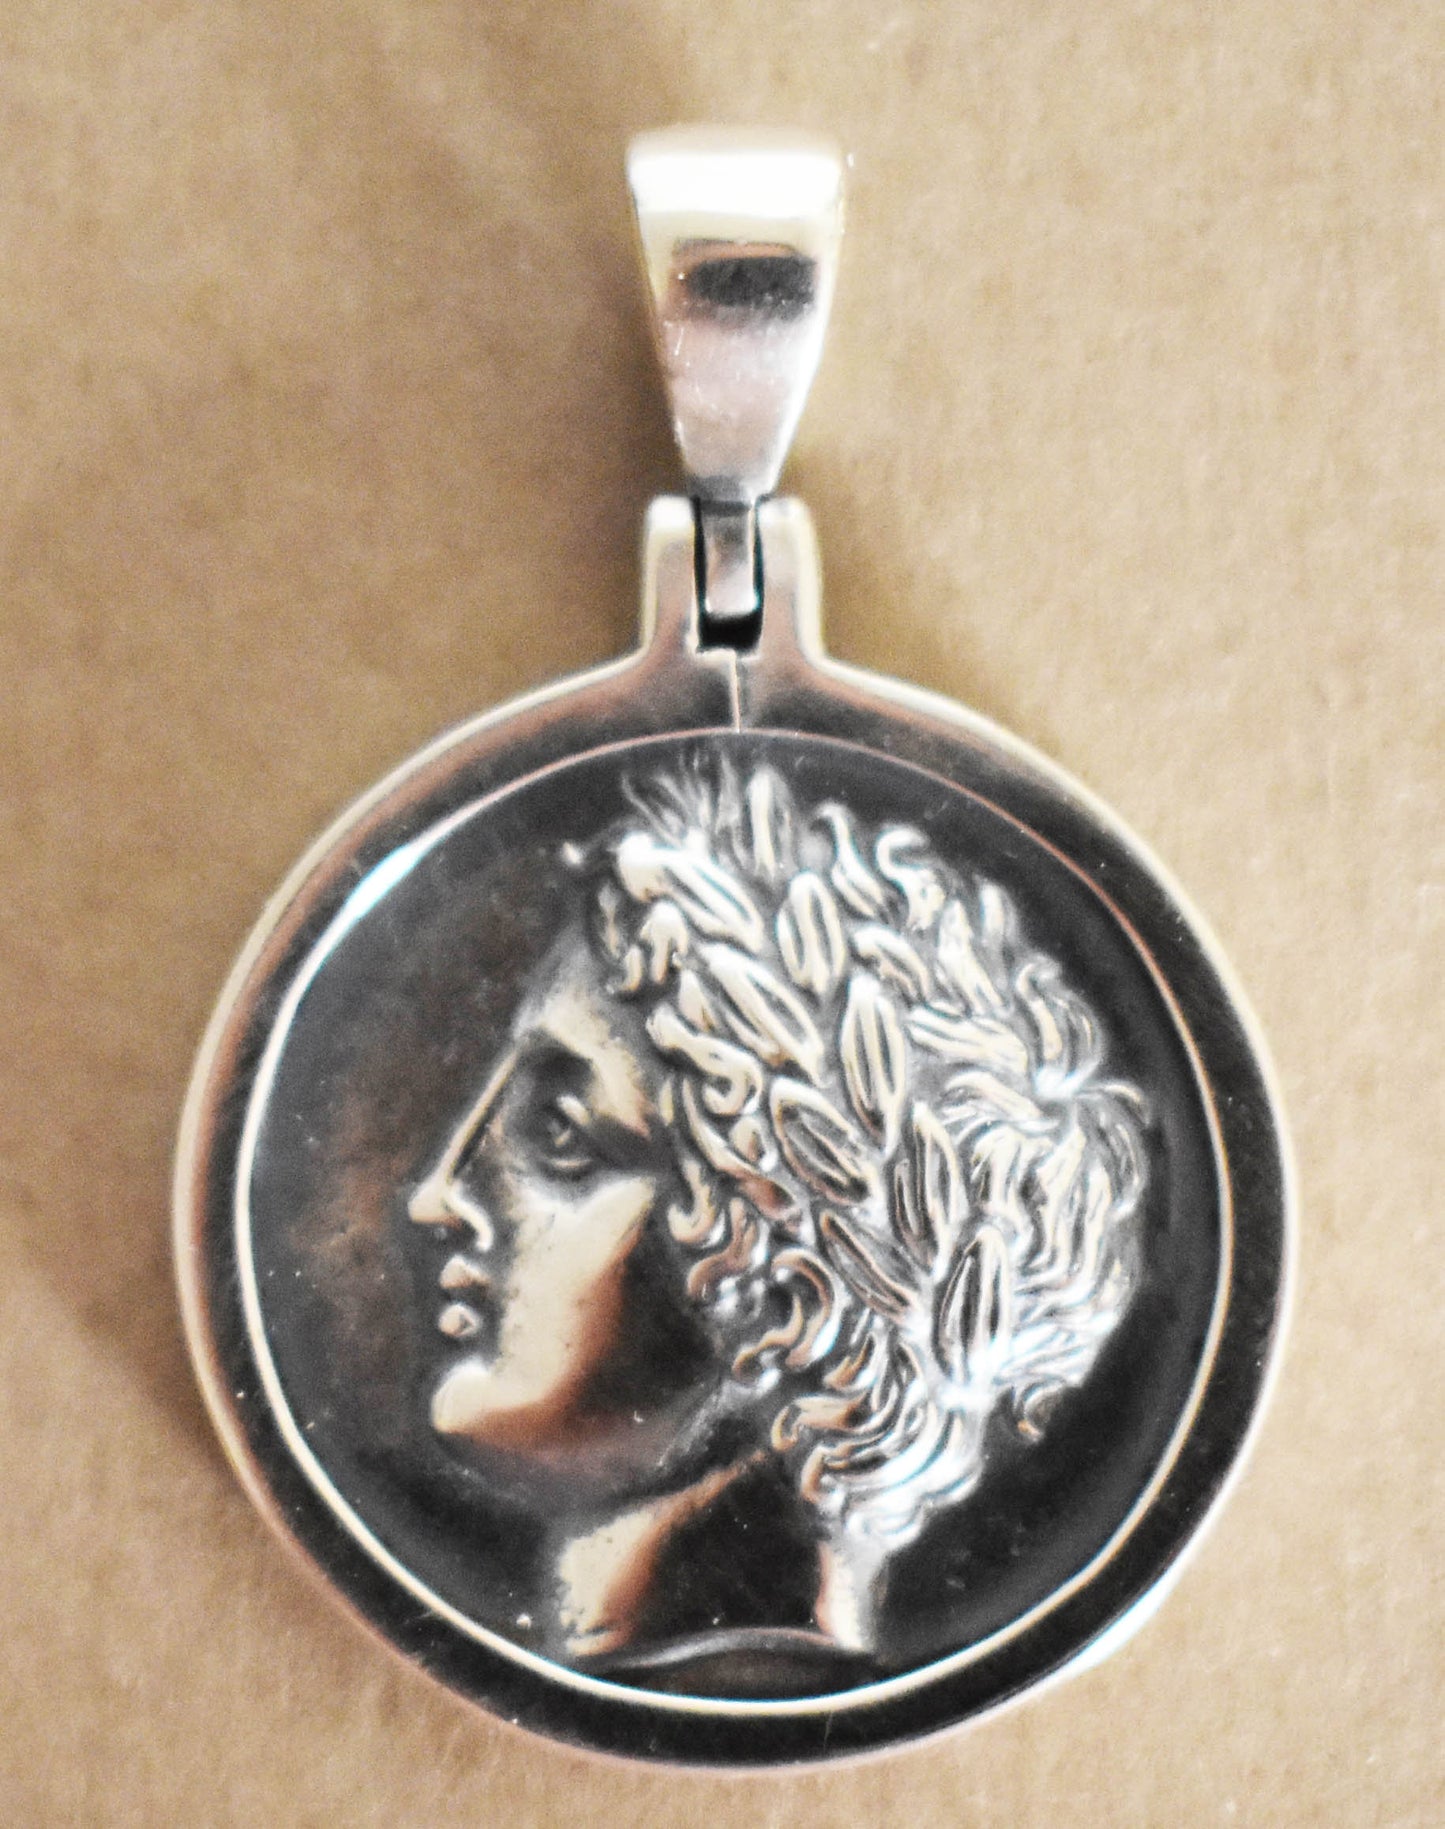 Apollo - Greek Roman God of archery, music and dance, prophecy, healing, Sun, light - Lyre - Coin Pendant - 925 Sterling Silver